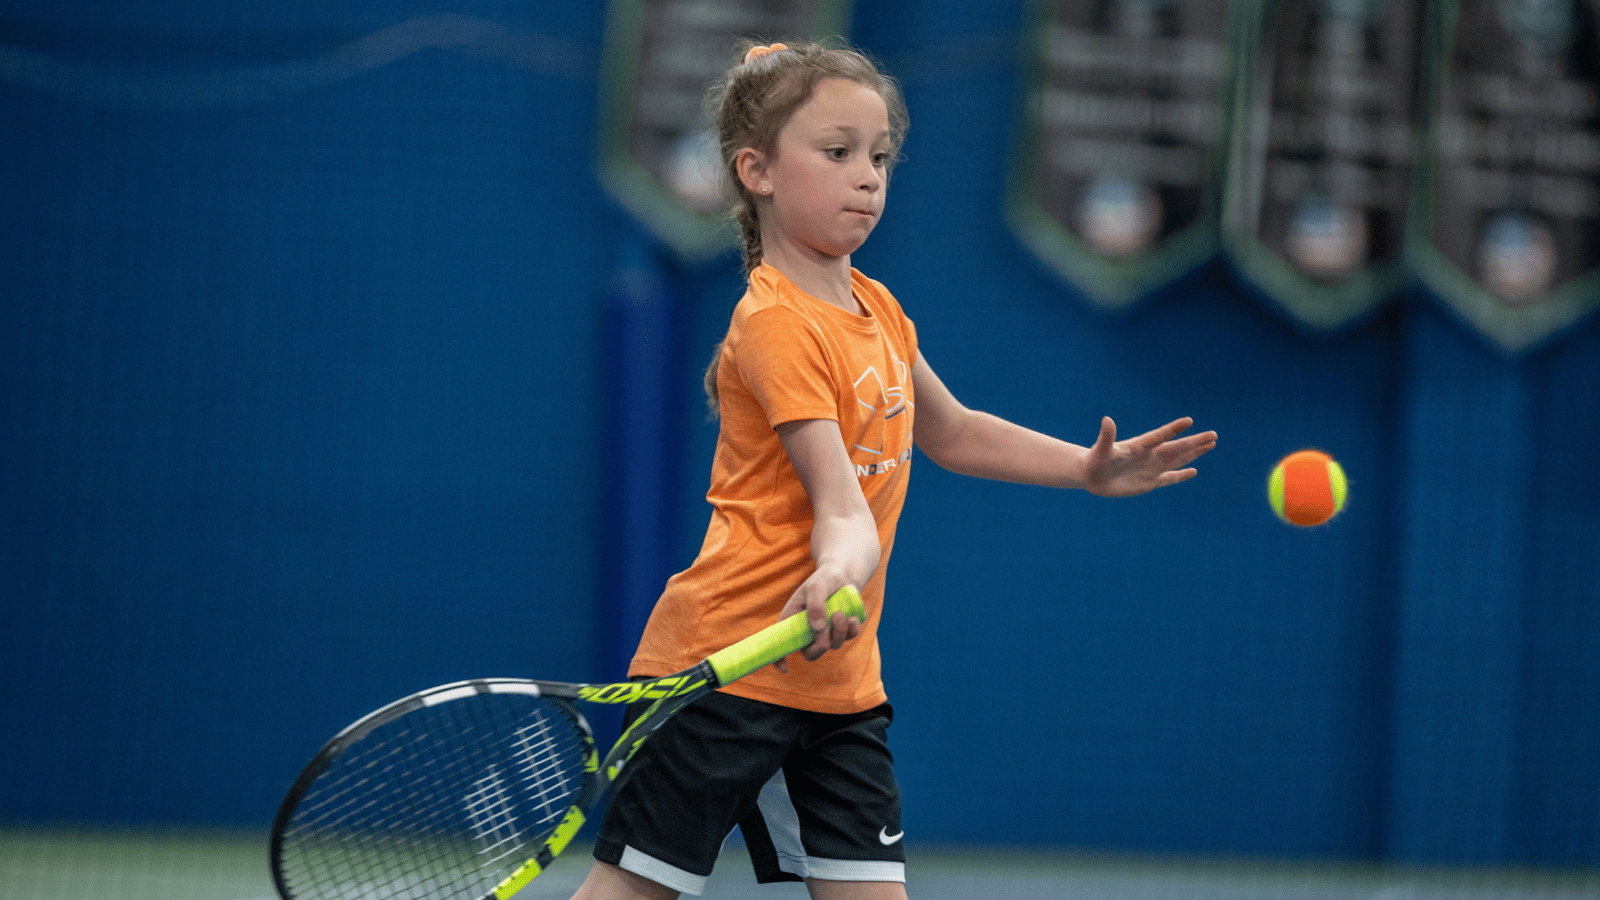 Young girl in orange shirt hits orange ball with racquet